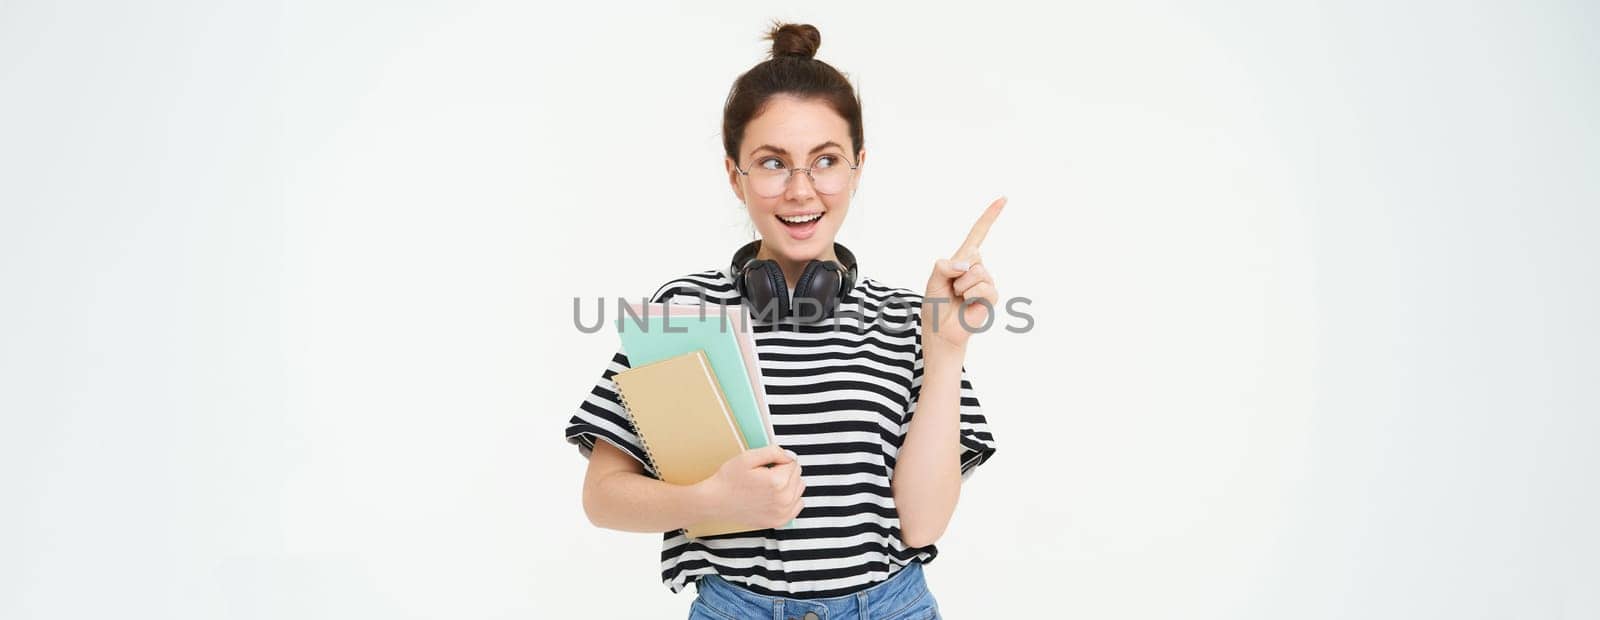 Image of young modern girl, student or teacher in glasses, holding documents and notebooks, pointing at upper left corner with pleased smile, showing advertisement, white background.